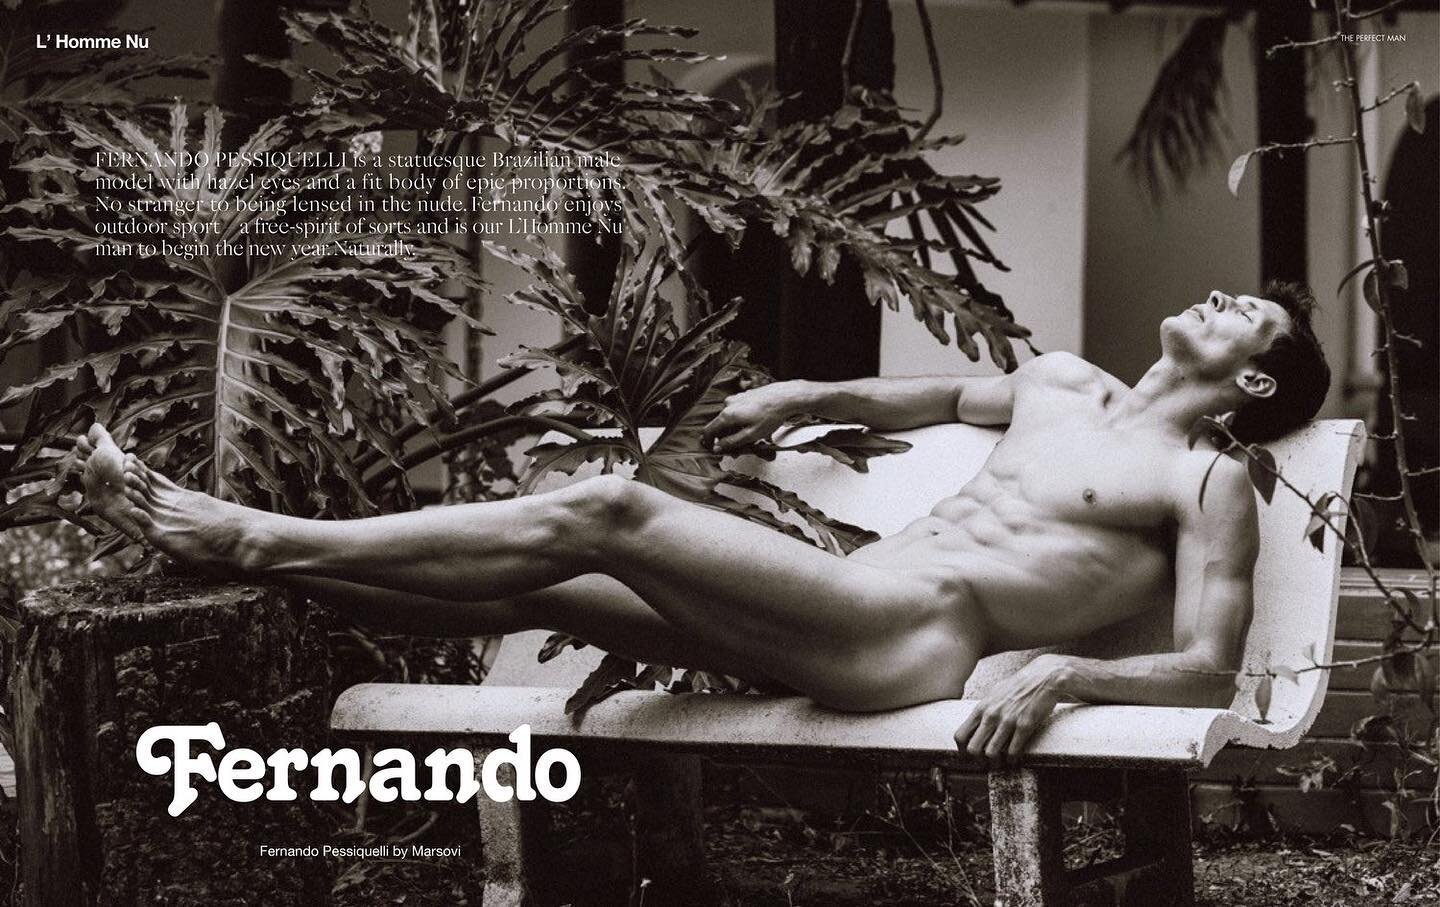 FERNANDO PESSIQUELLI is a statuesque Brazilian male model with hazel eyes and a fit body of epic proportions. No stranger to being lensed in the nude. Fernando enjoys outdoor sport&mdash;a free-spirit of sorts and is our L&rsquo;Homme Nu man to begin